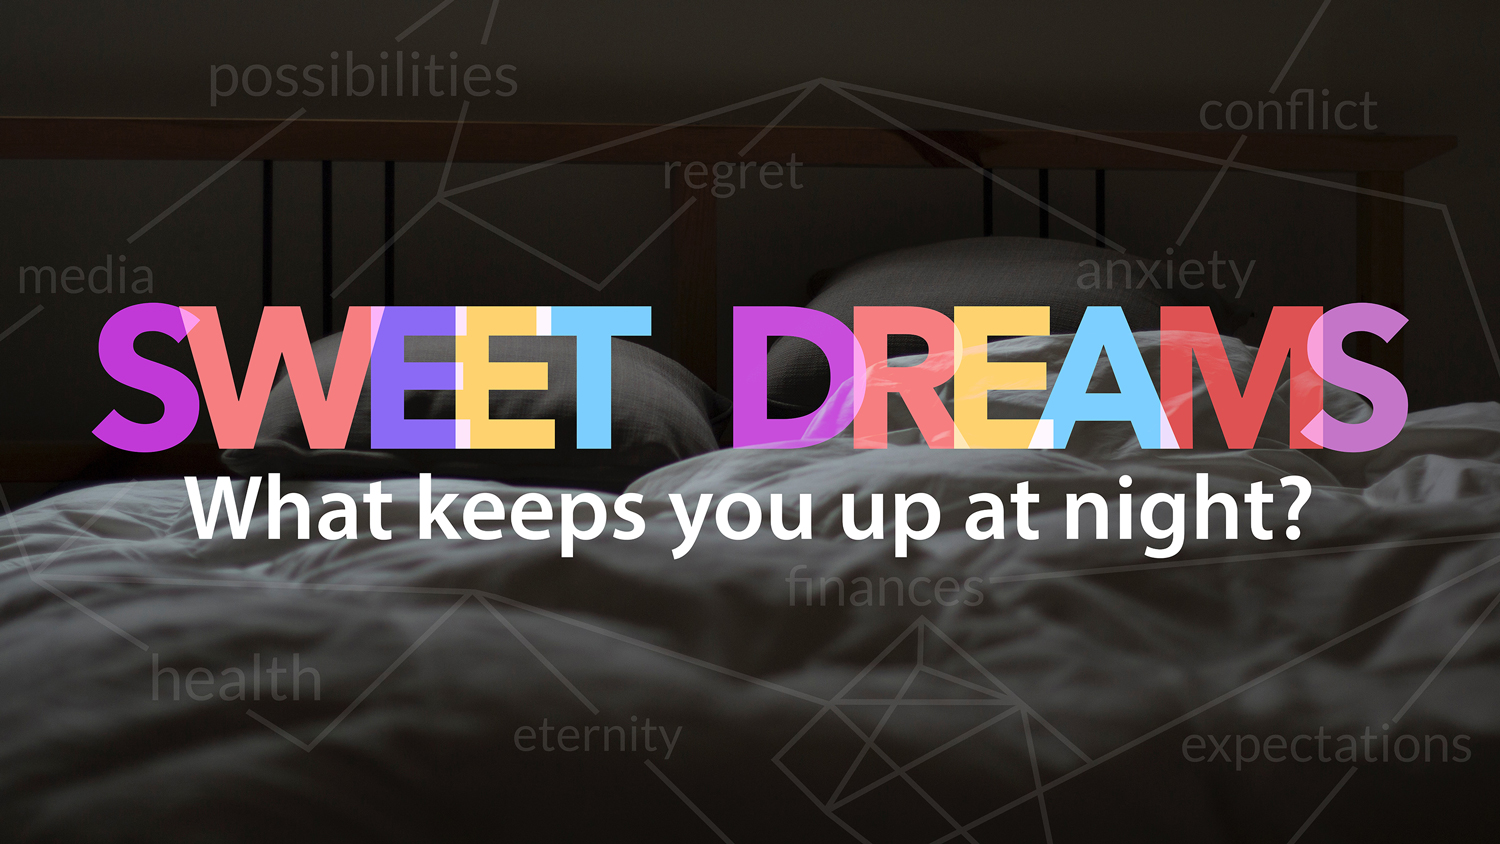 Sweet Dreams:  Anticipation:  What are you looking forward to?